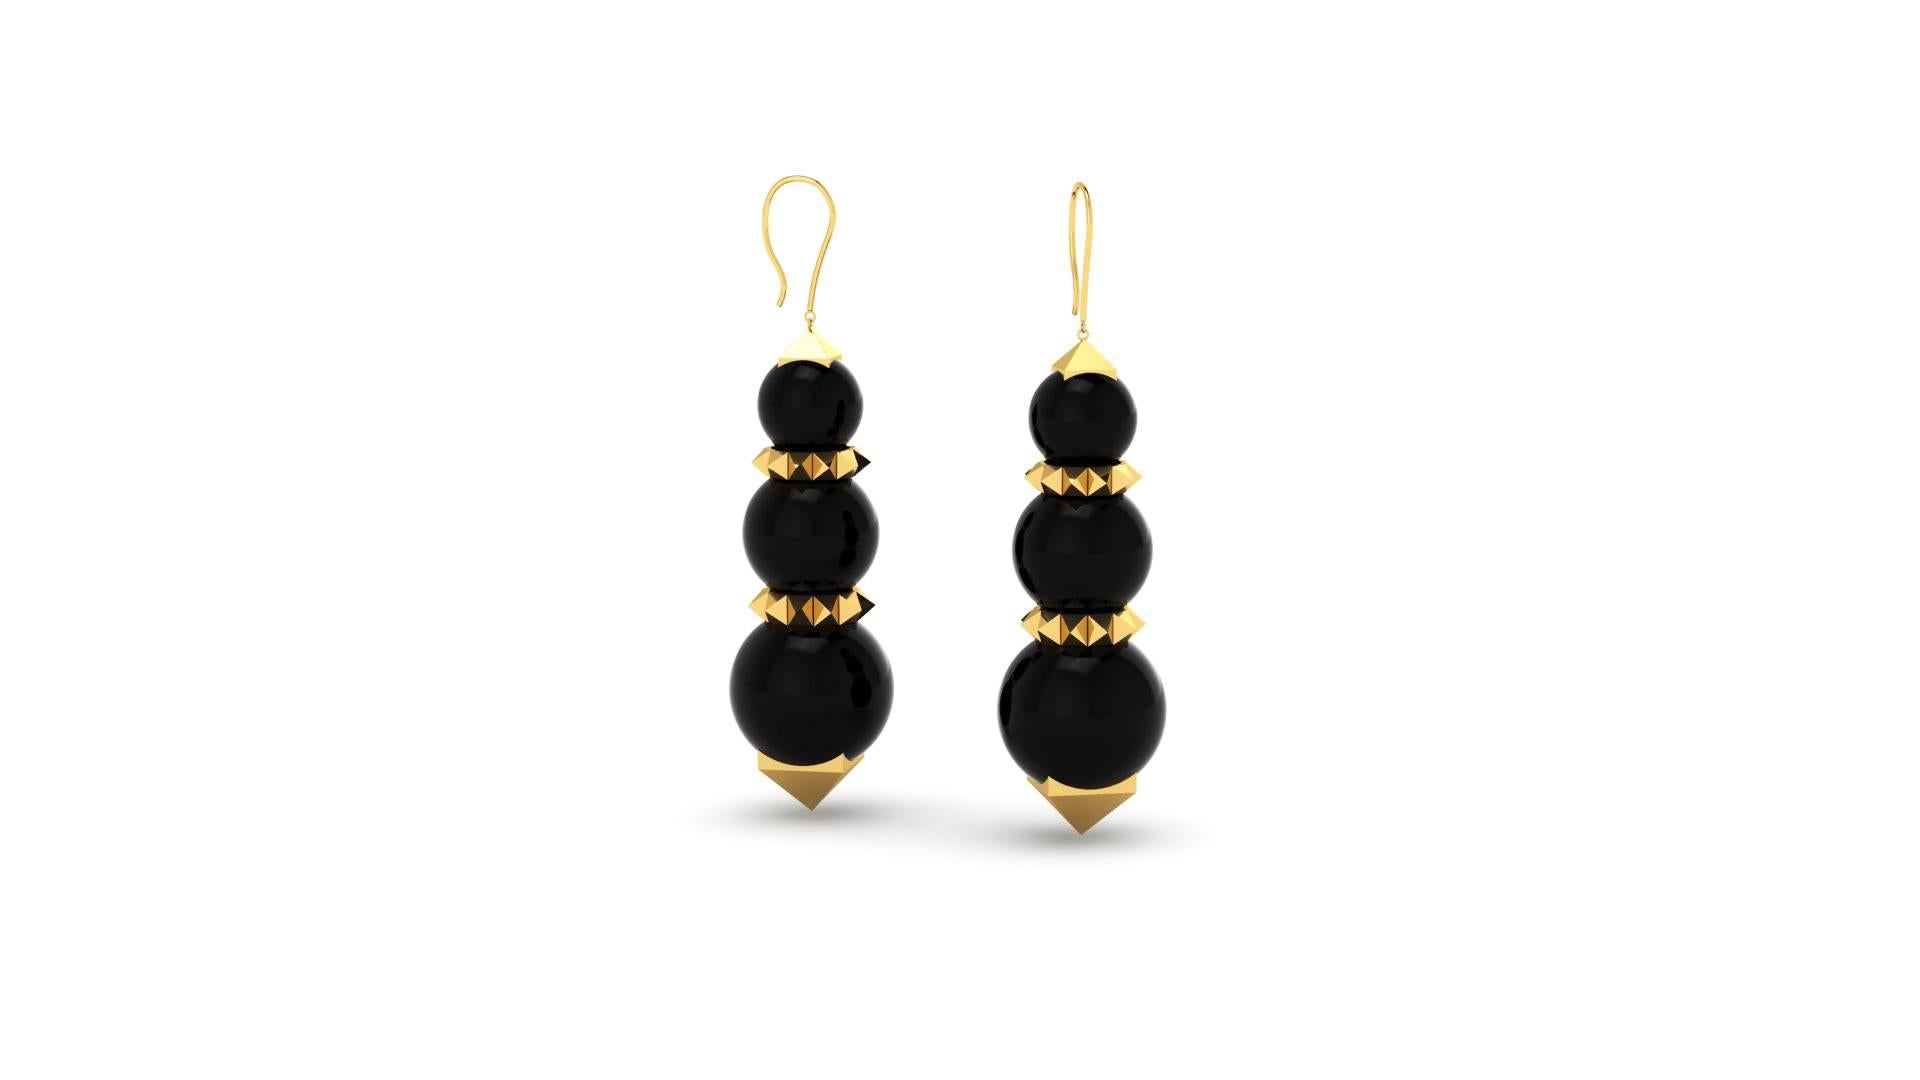 from FERRUCCI's collection Pyramid, black onyx beads in 18k yellow gold made in New York, for a strong woman with innate class.

